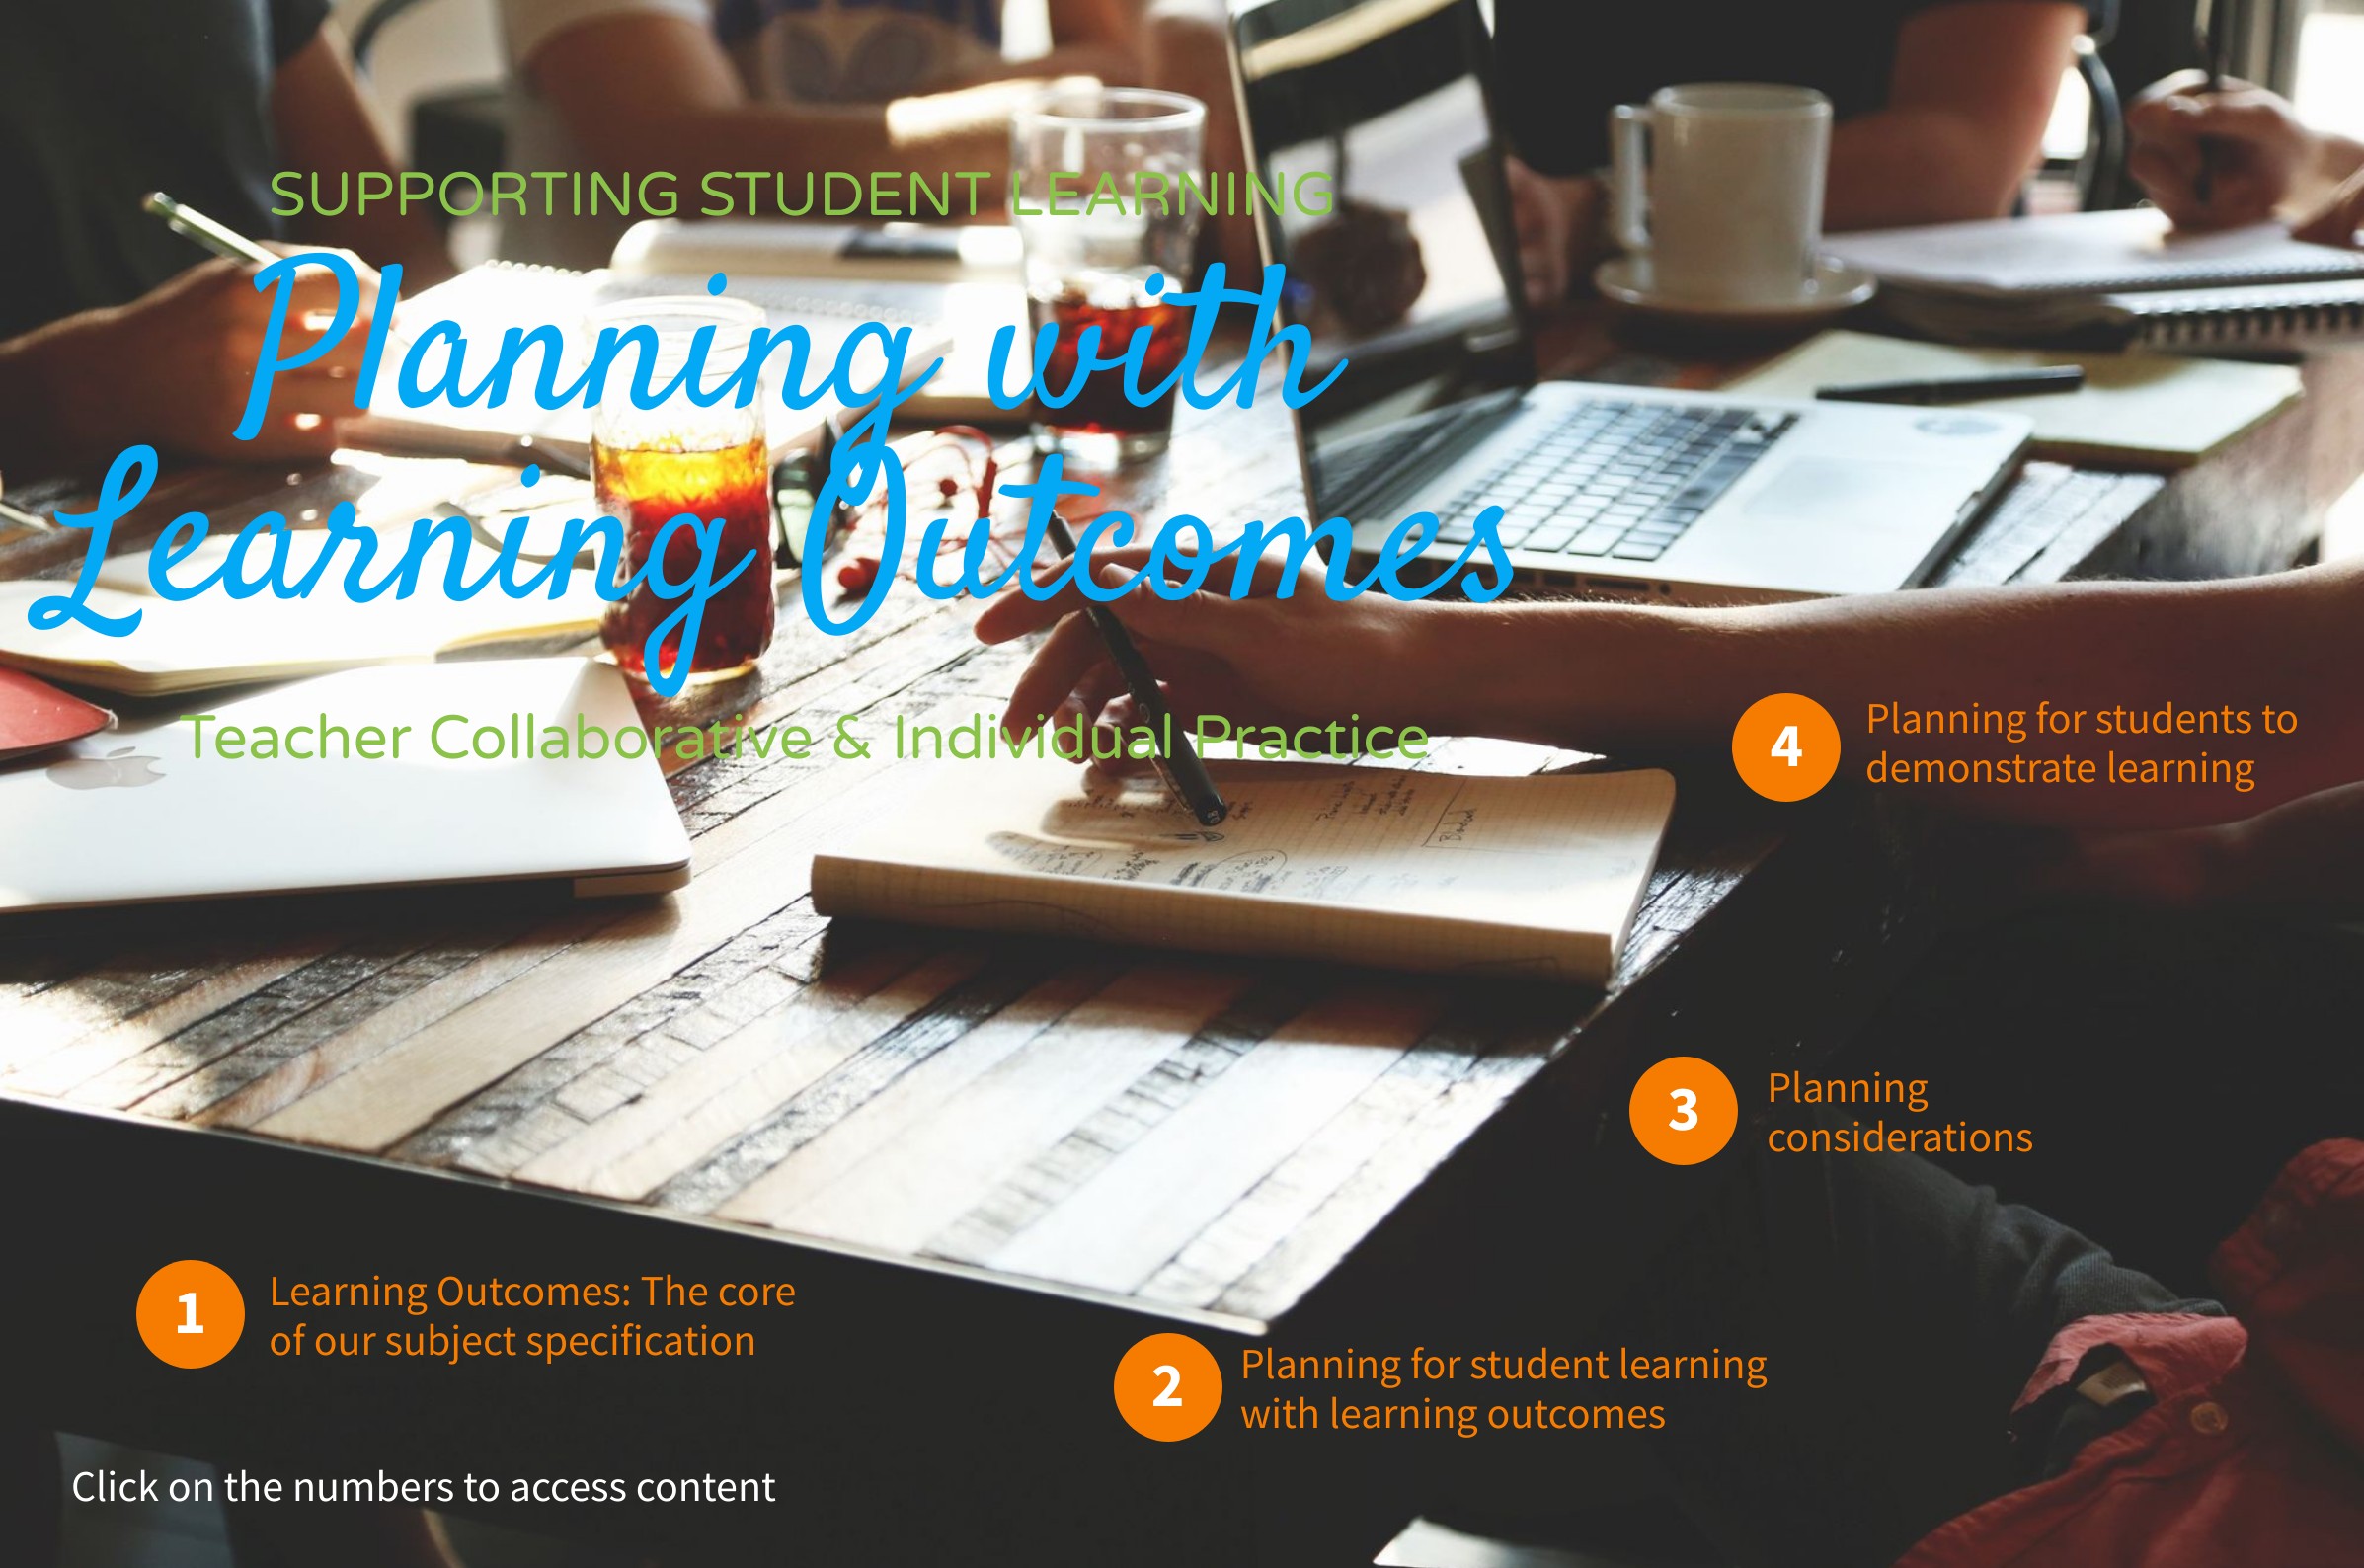 Planning with Learning Outcomes